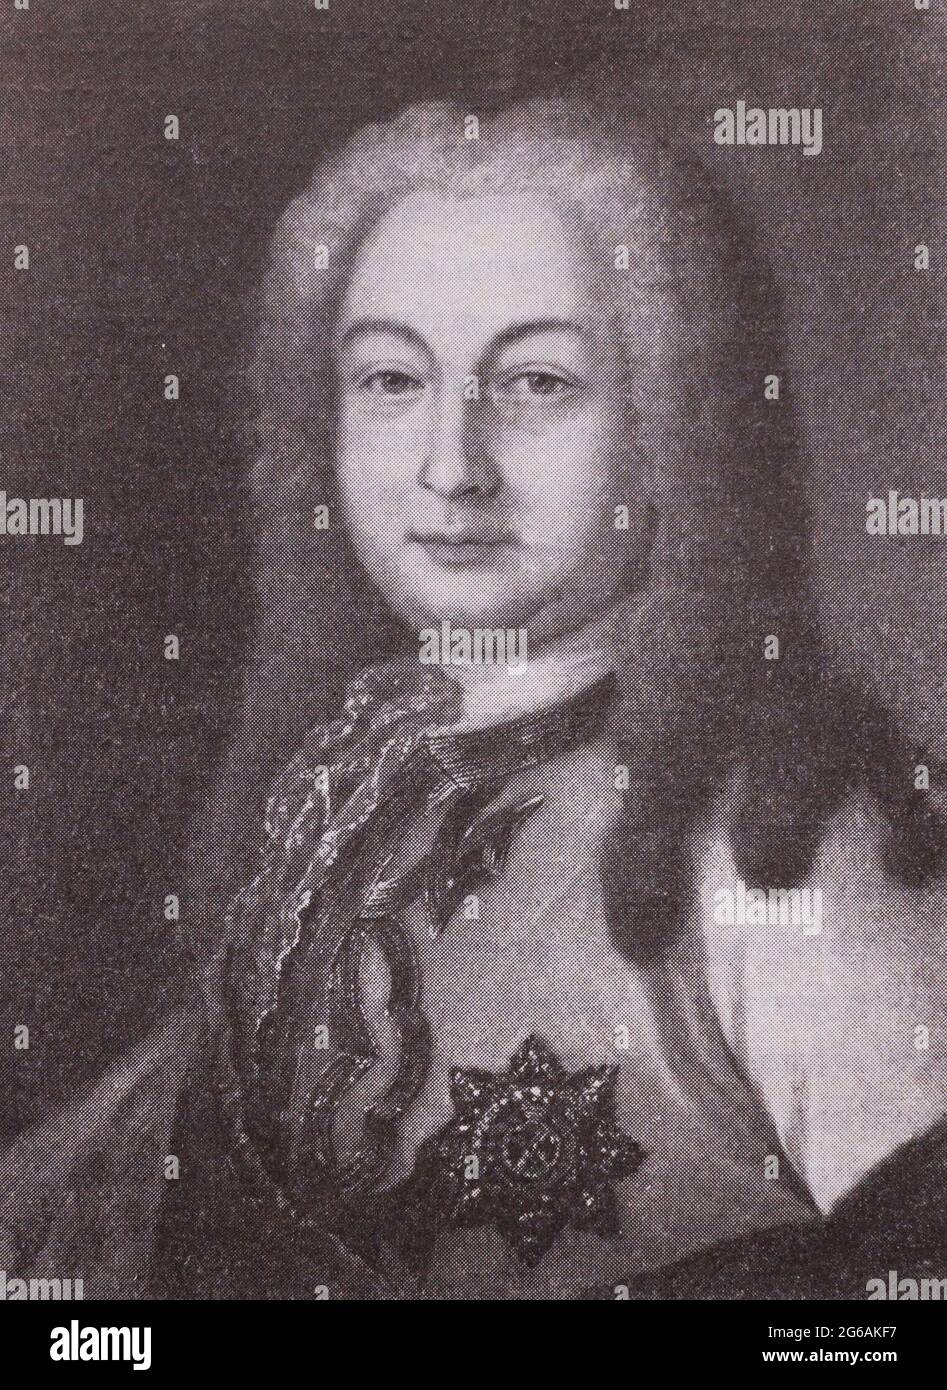 Count Andrey Ivanovich Osterman, Painting of the 18th century. Count Andrey Ivanovich Osterman (1686  – 1747) was a German-born Russian statesman who came to prominence under Tsar Peter I of Russia and served until the accession of the Tsesarevna Elizabeth in 1741. He based his foreign policy on the Austrian alliance. General Admiral. Stock Photo